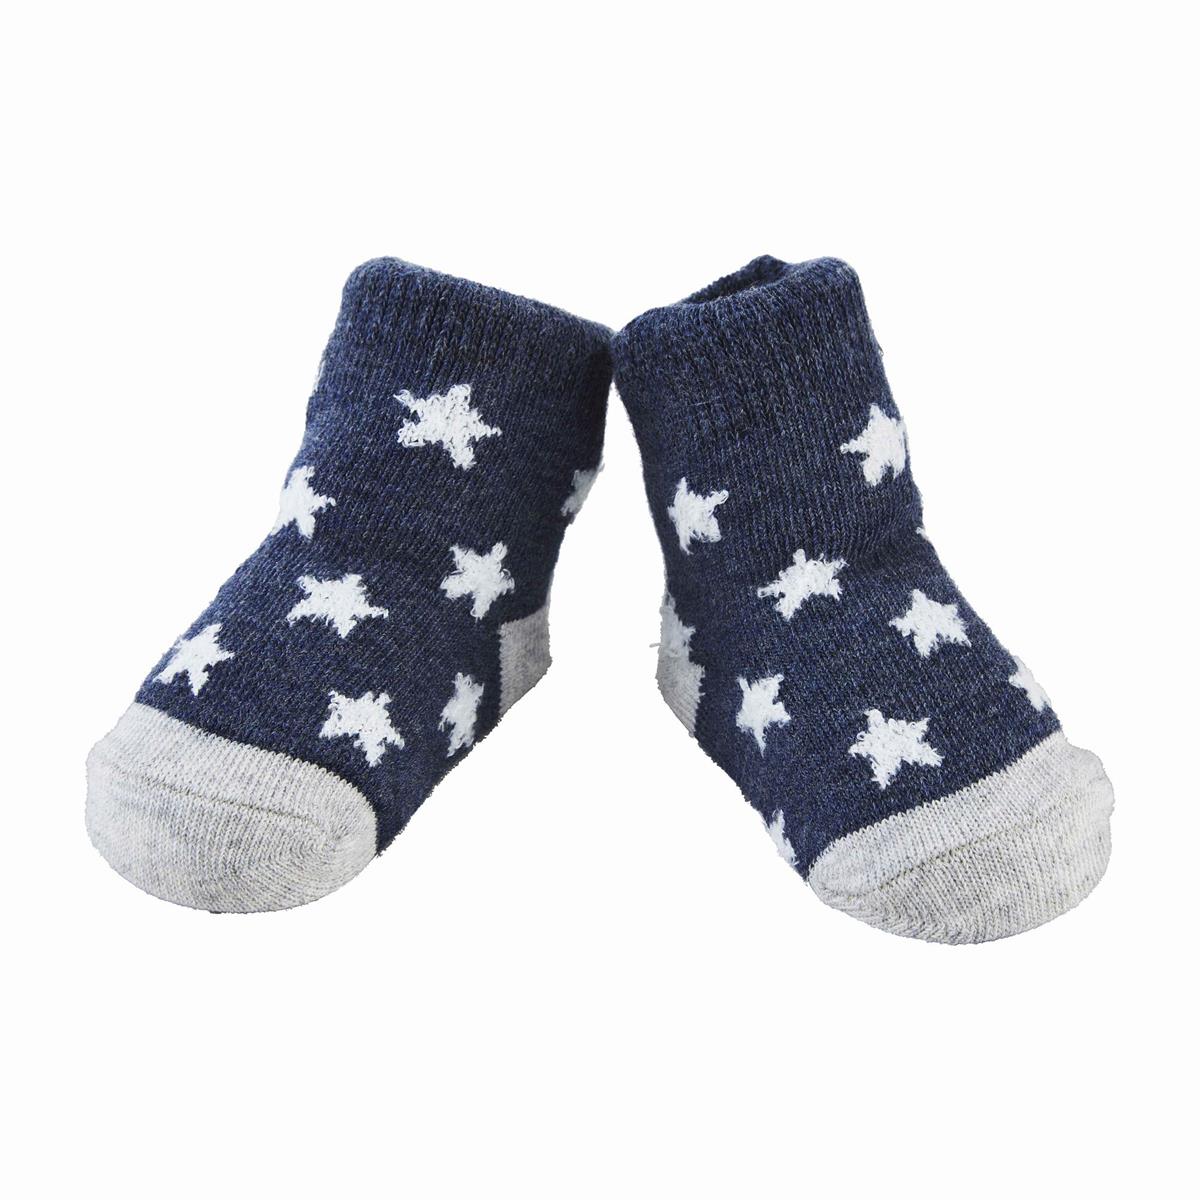 Mud Pie Navy Chenille Star Baby Socks - BeautyOfASite - Central Illinois Gifts, Fashion & Beauty Boutique